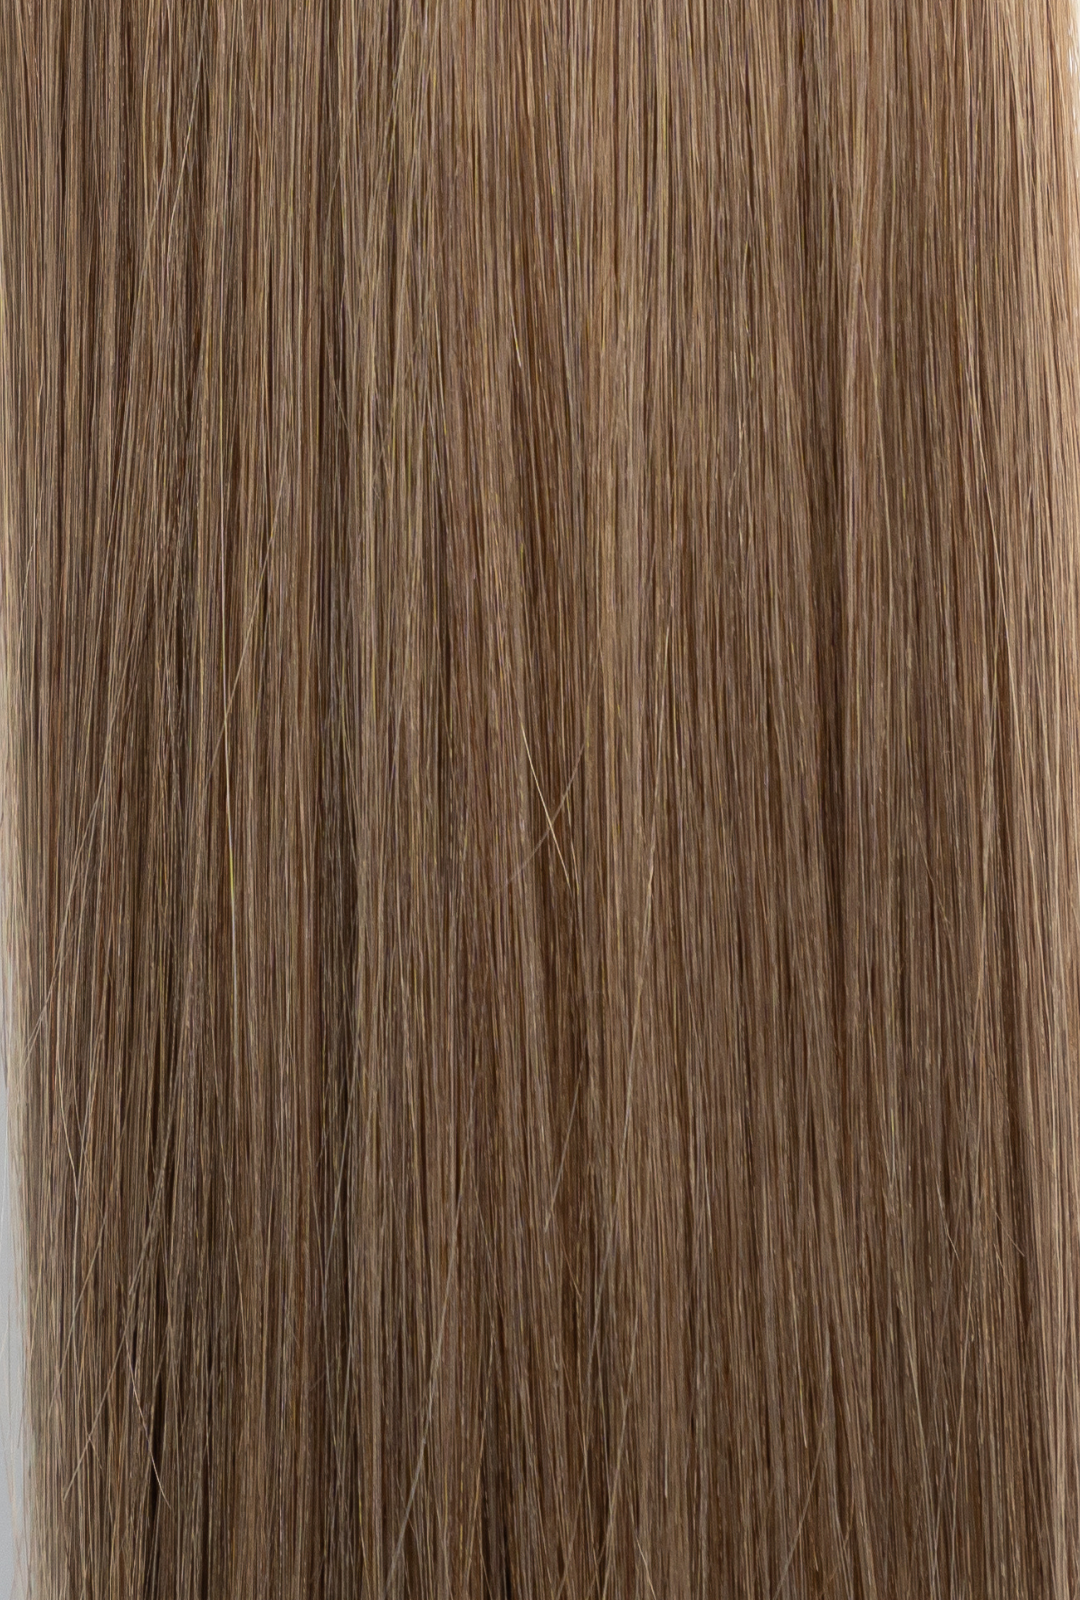 Laced Hair Hand Tied Weft Extensions #8